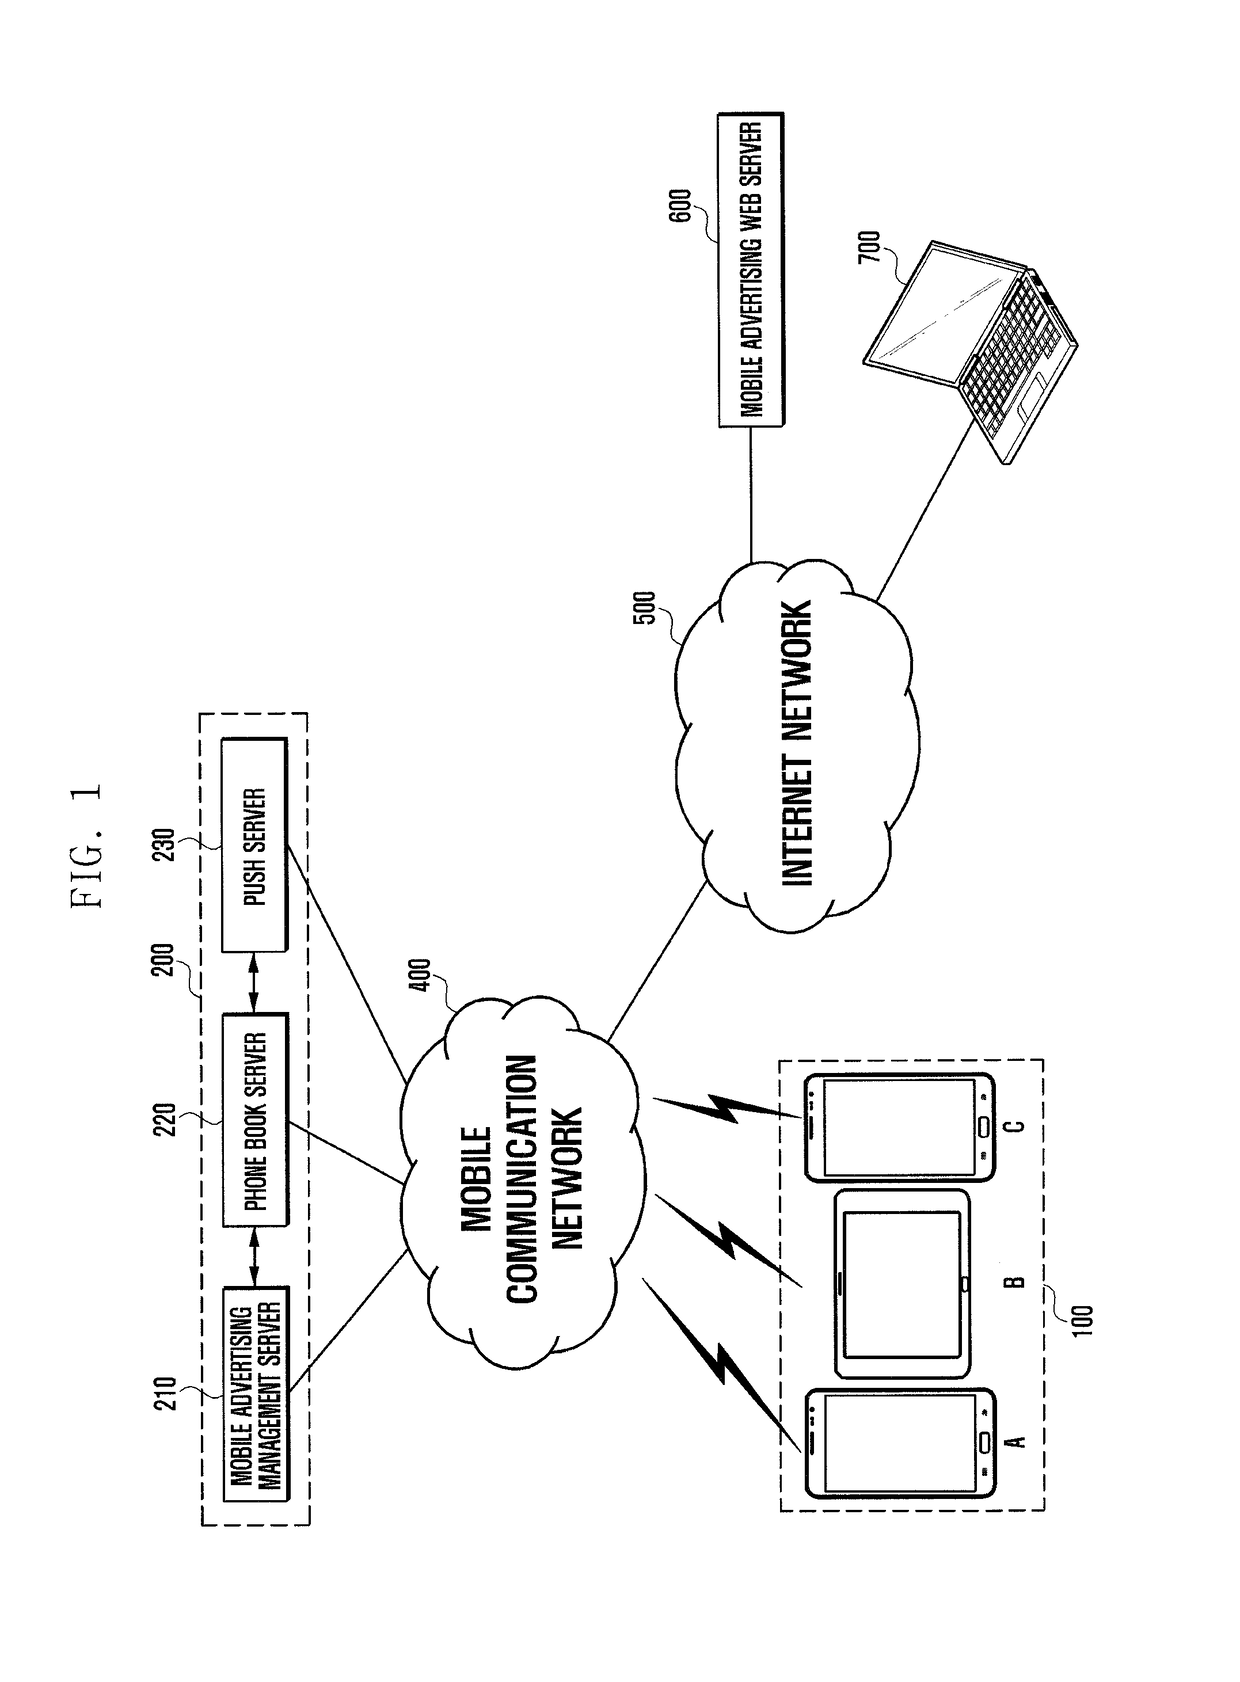 System and method for providing mobile advertising services